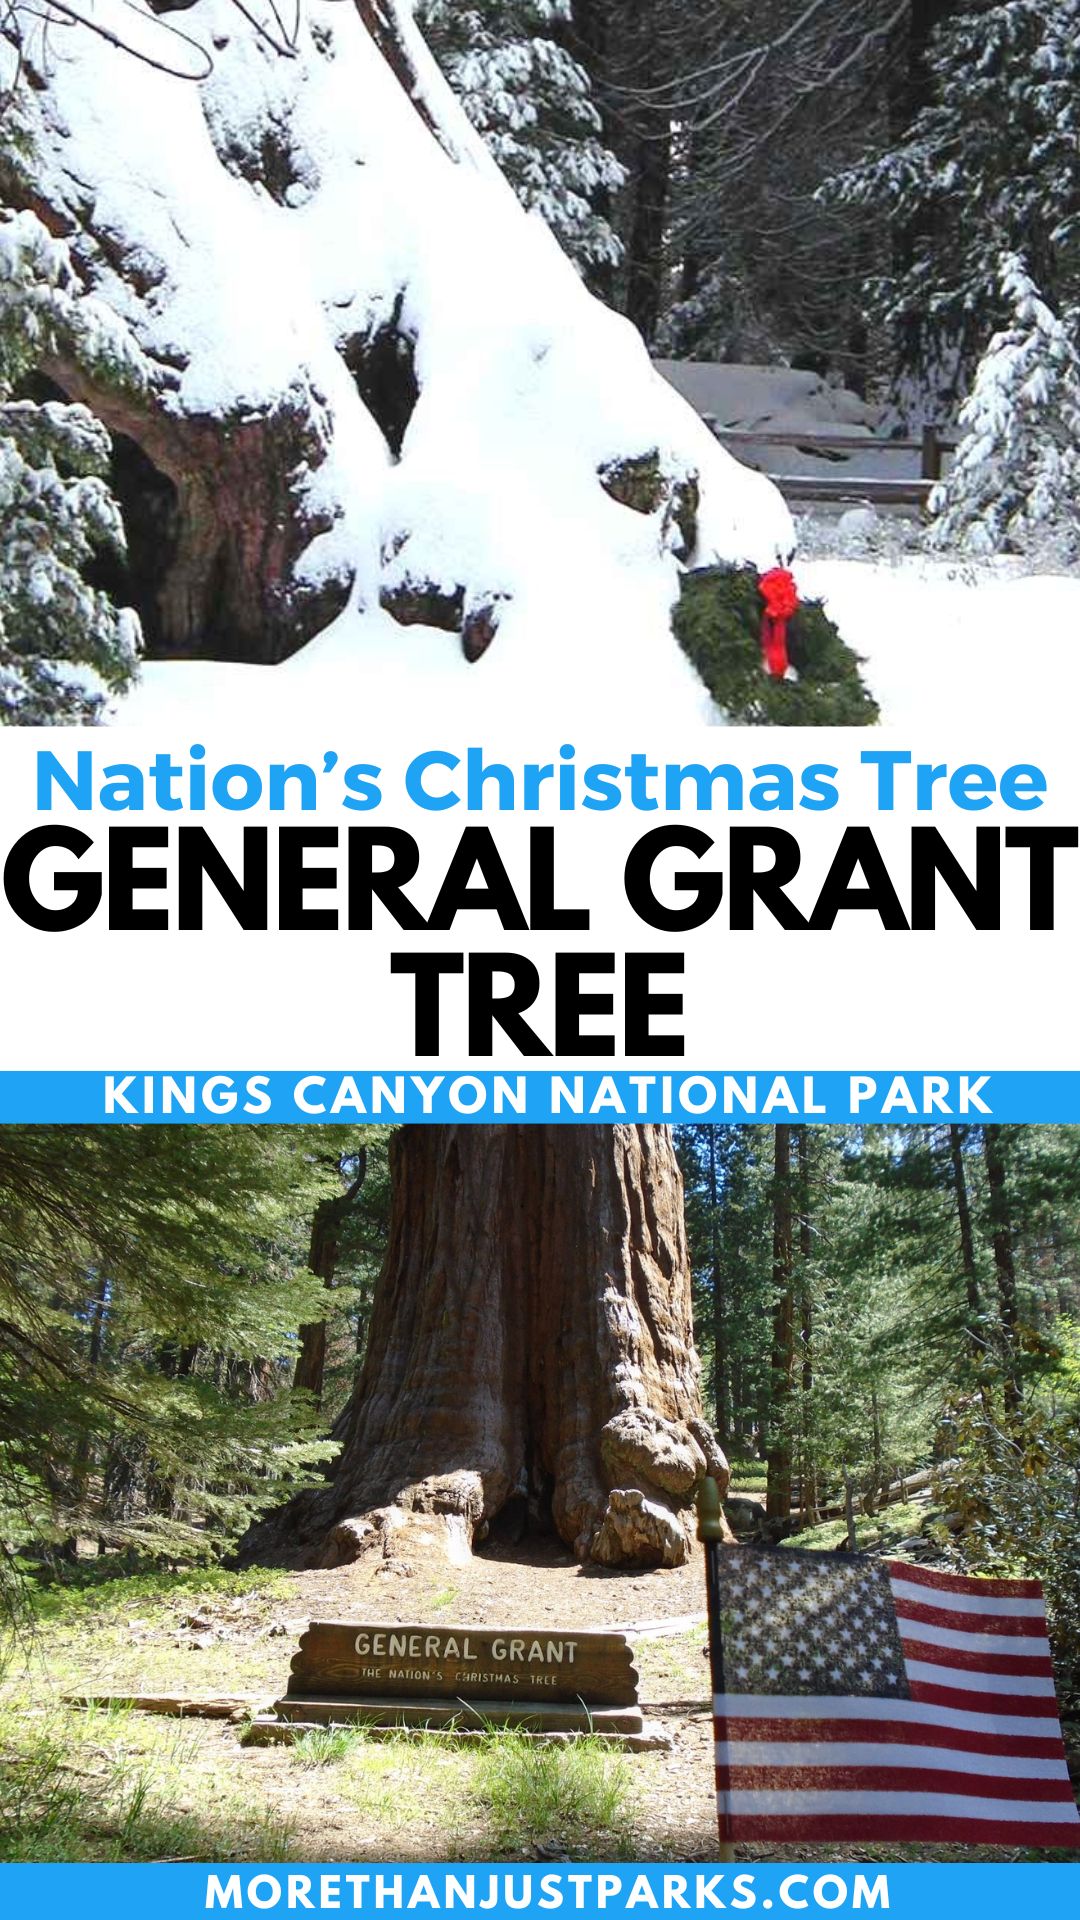 Graphic reads "The Nation's Christmas Tree General Grant Tree Kings Canyon National Park."